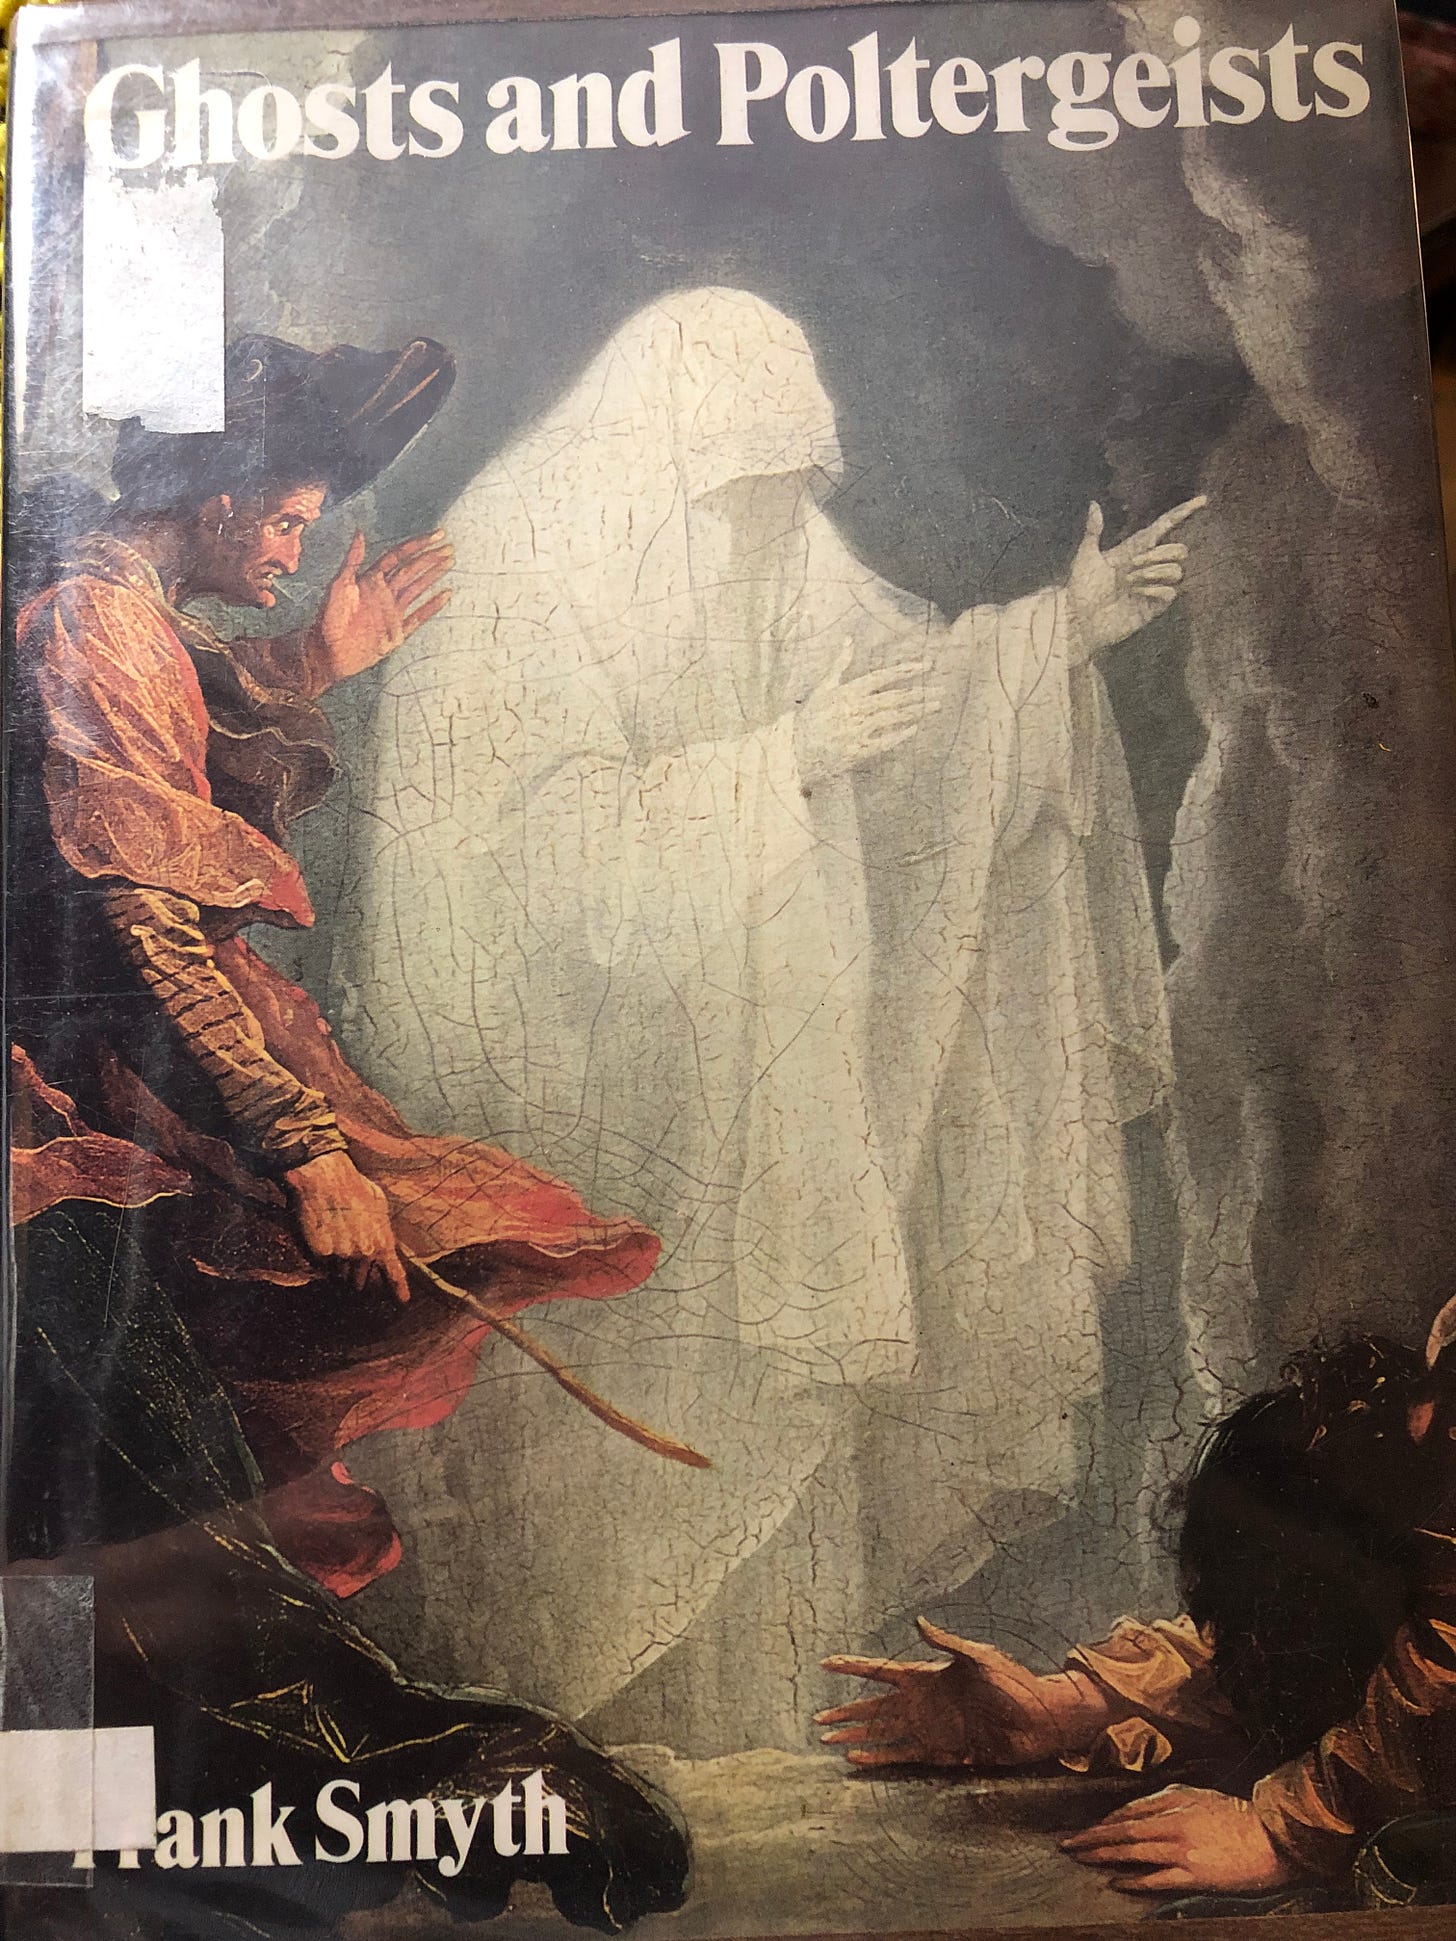 A ghost in a white sheath stands over a prostrate man while another man points a stick at him. 